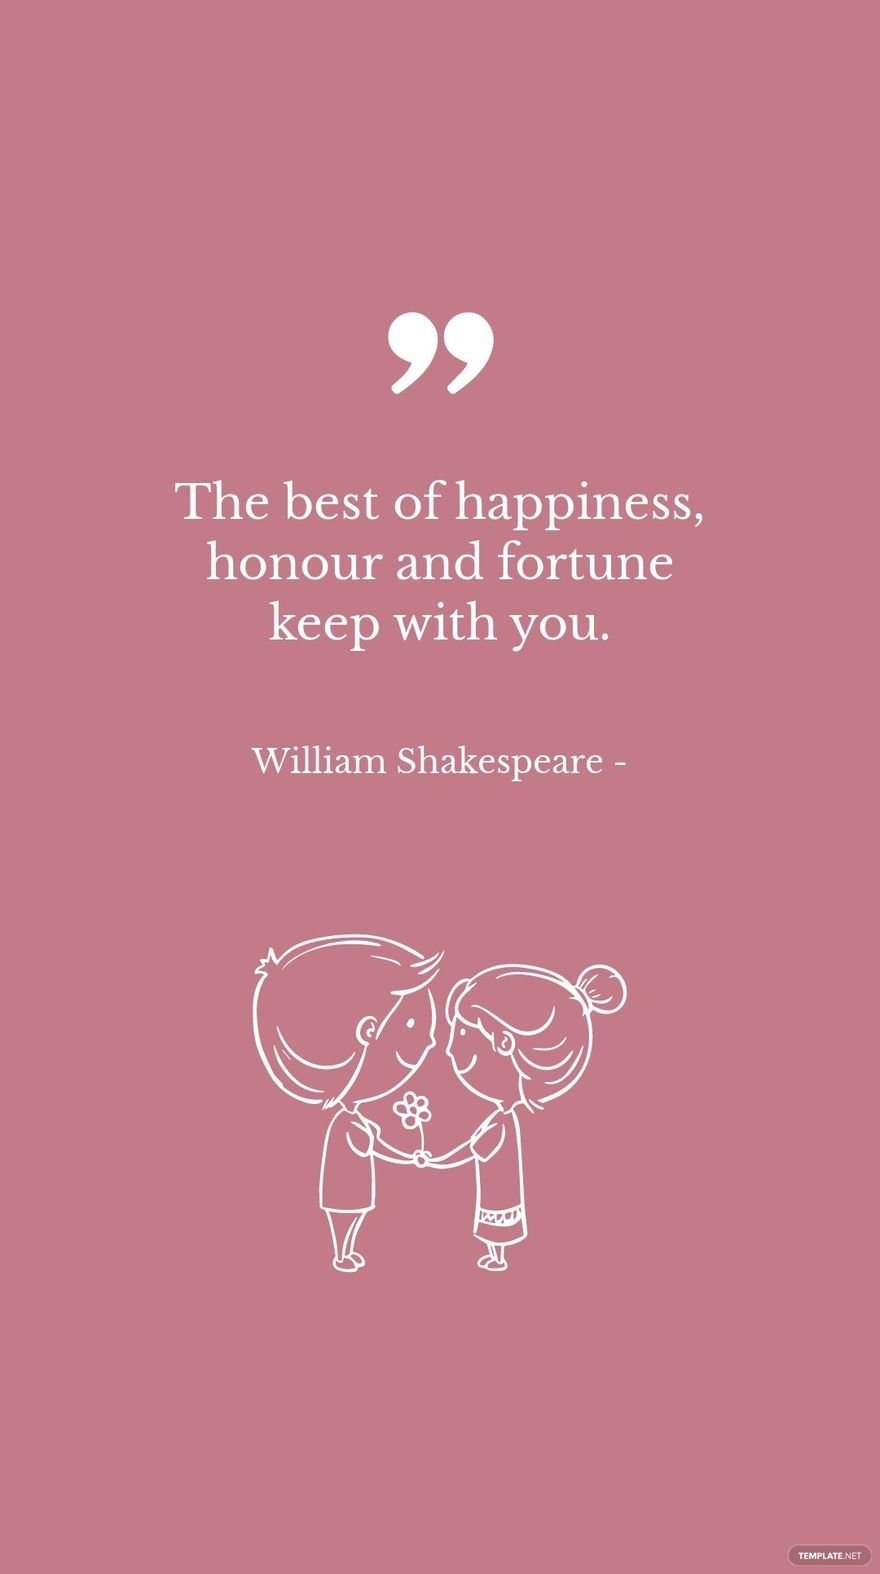 William Shakespeare - The best of happiness, honour and fortune keep with you.